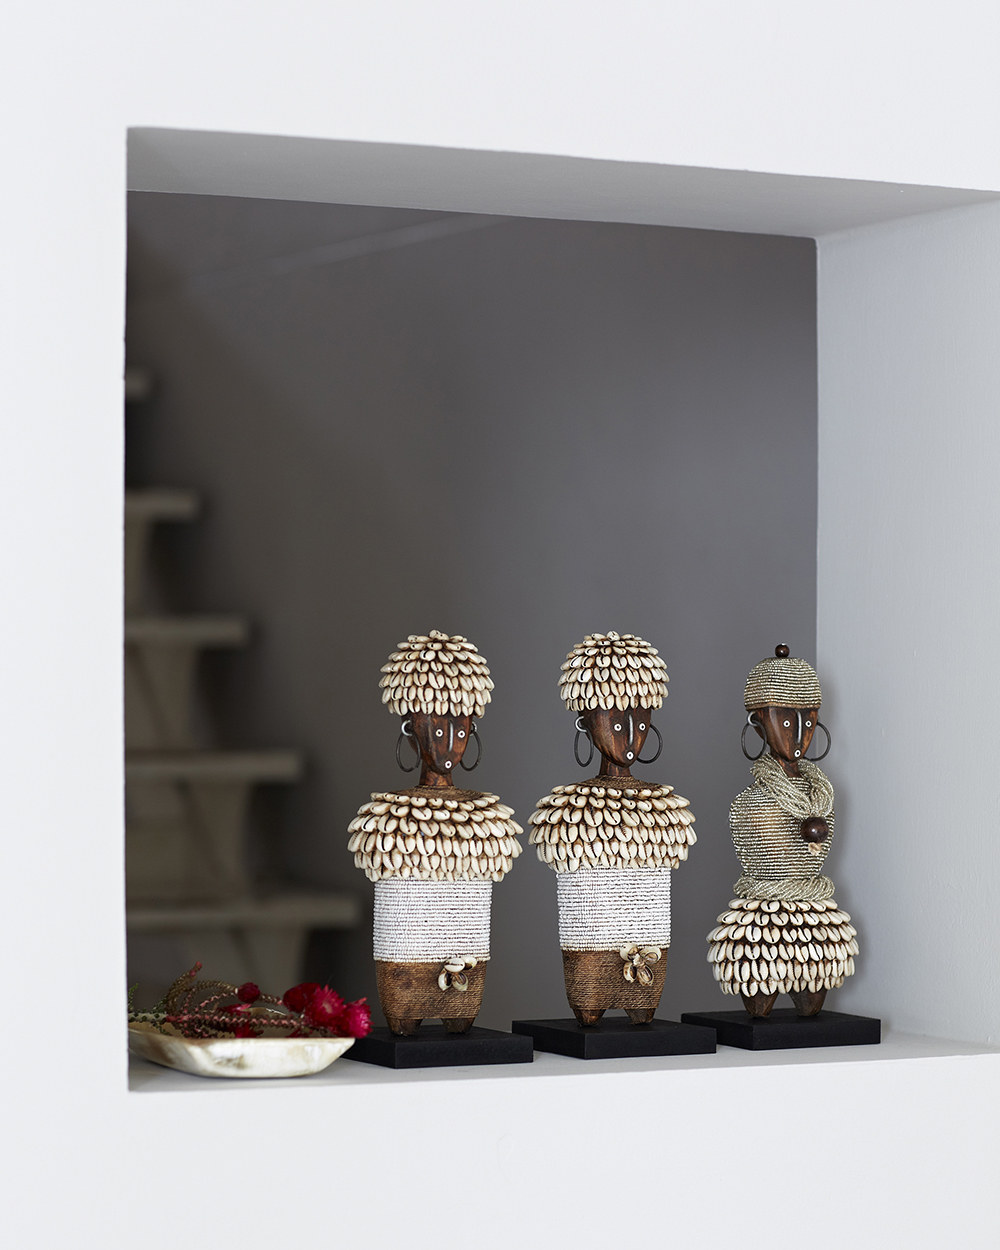 Tired of Humdrum Homeware? Get Stylish Pieces  From Kudu Home ASAP